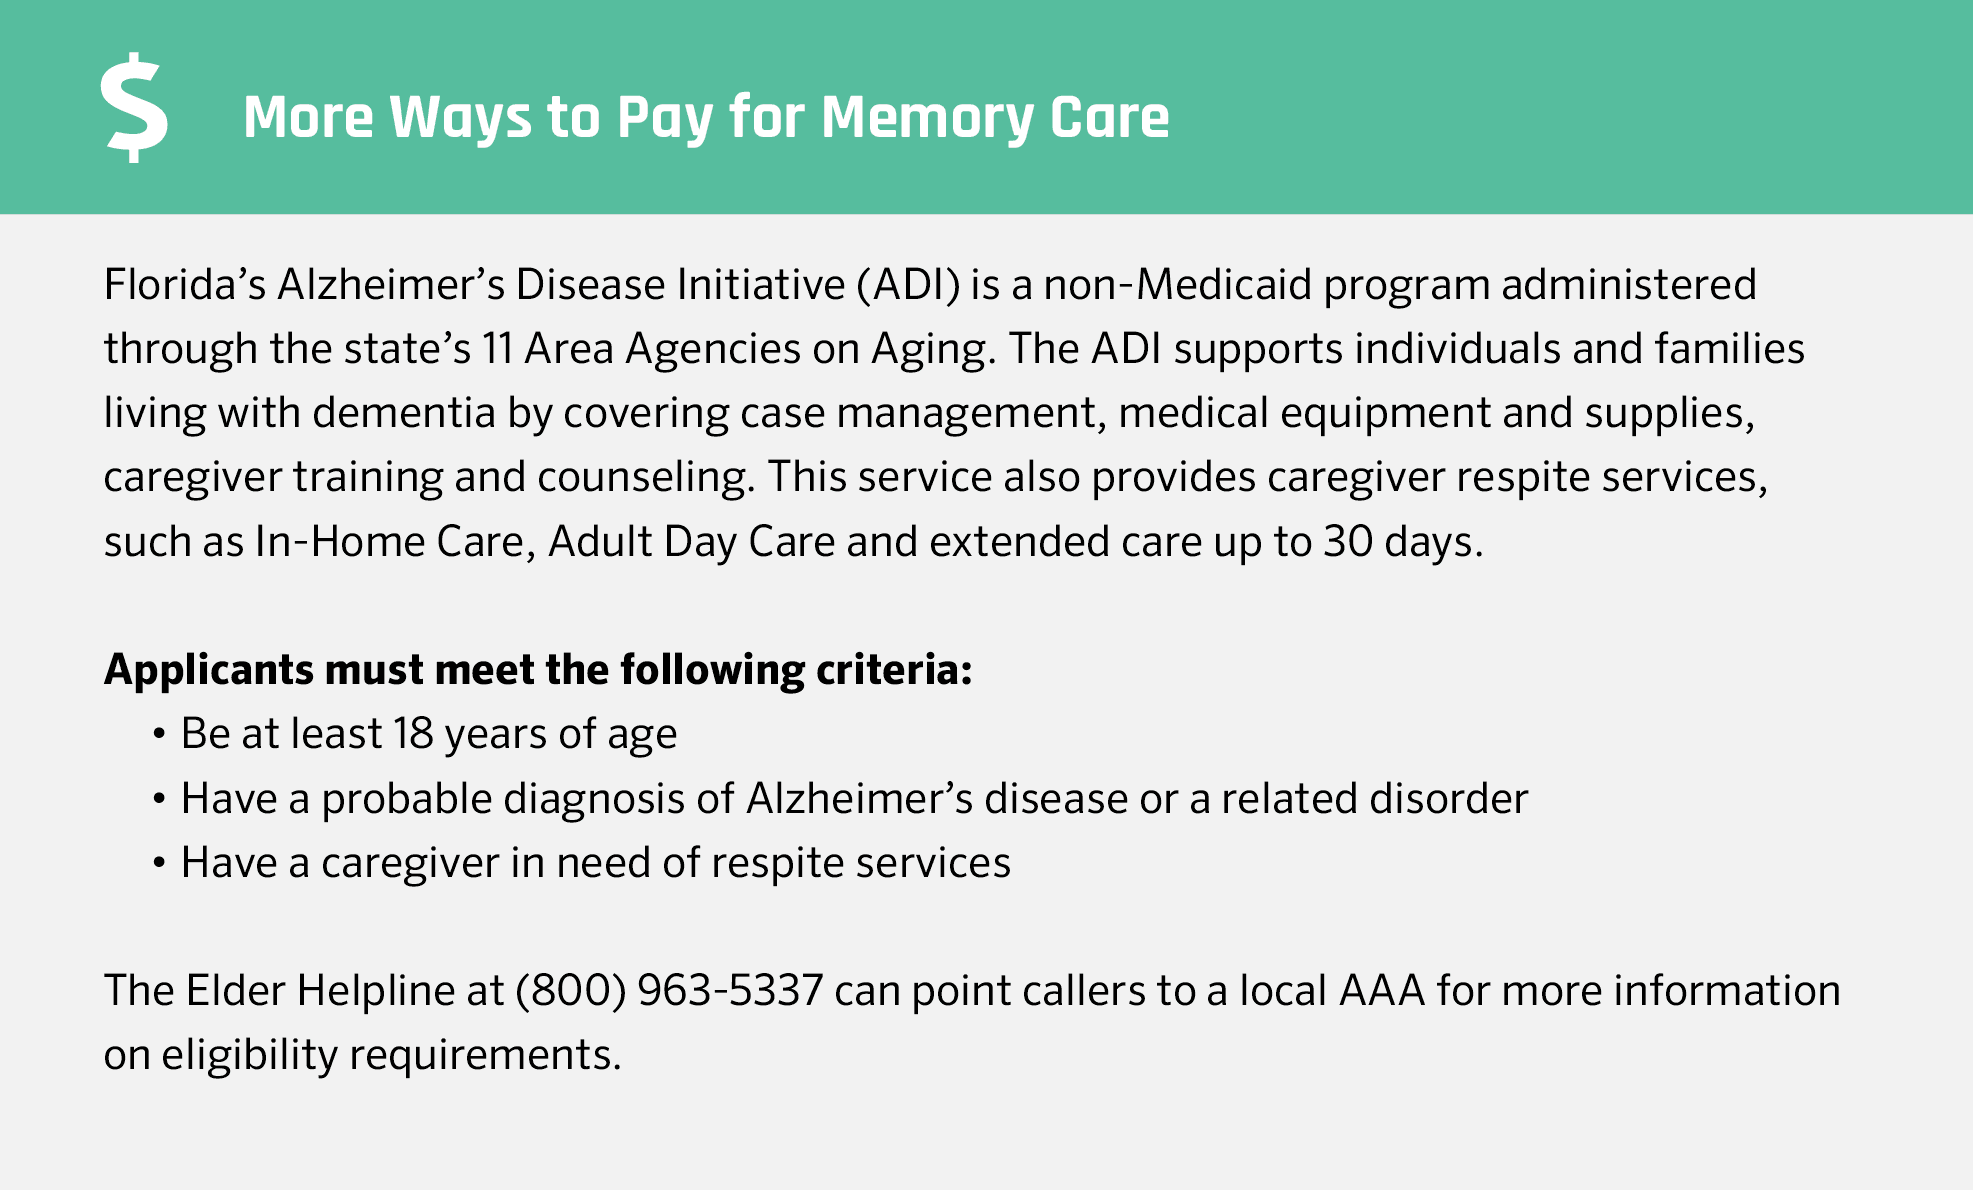 More ways to pay for memory care in Florida